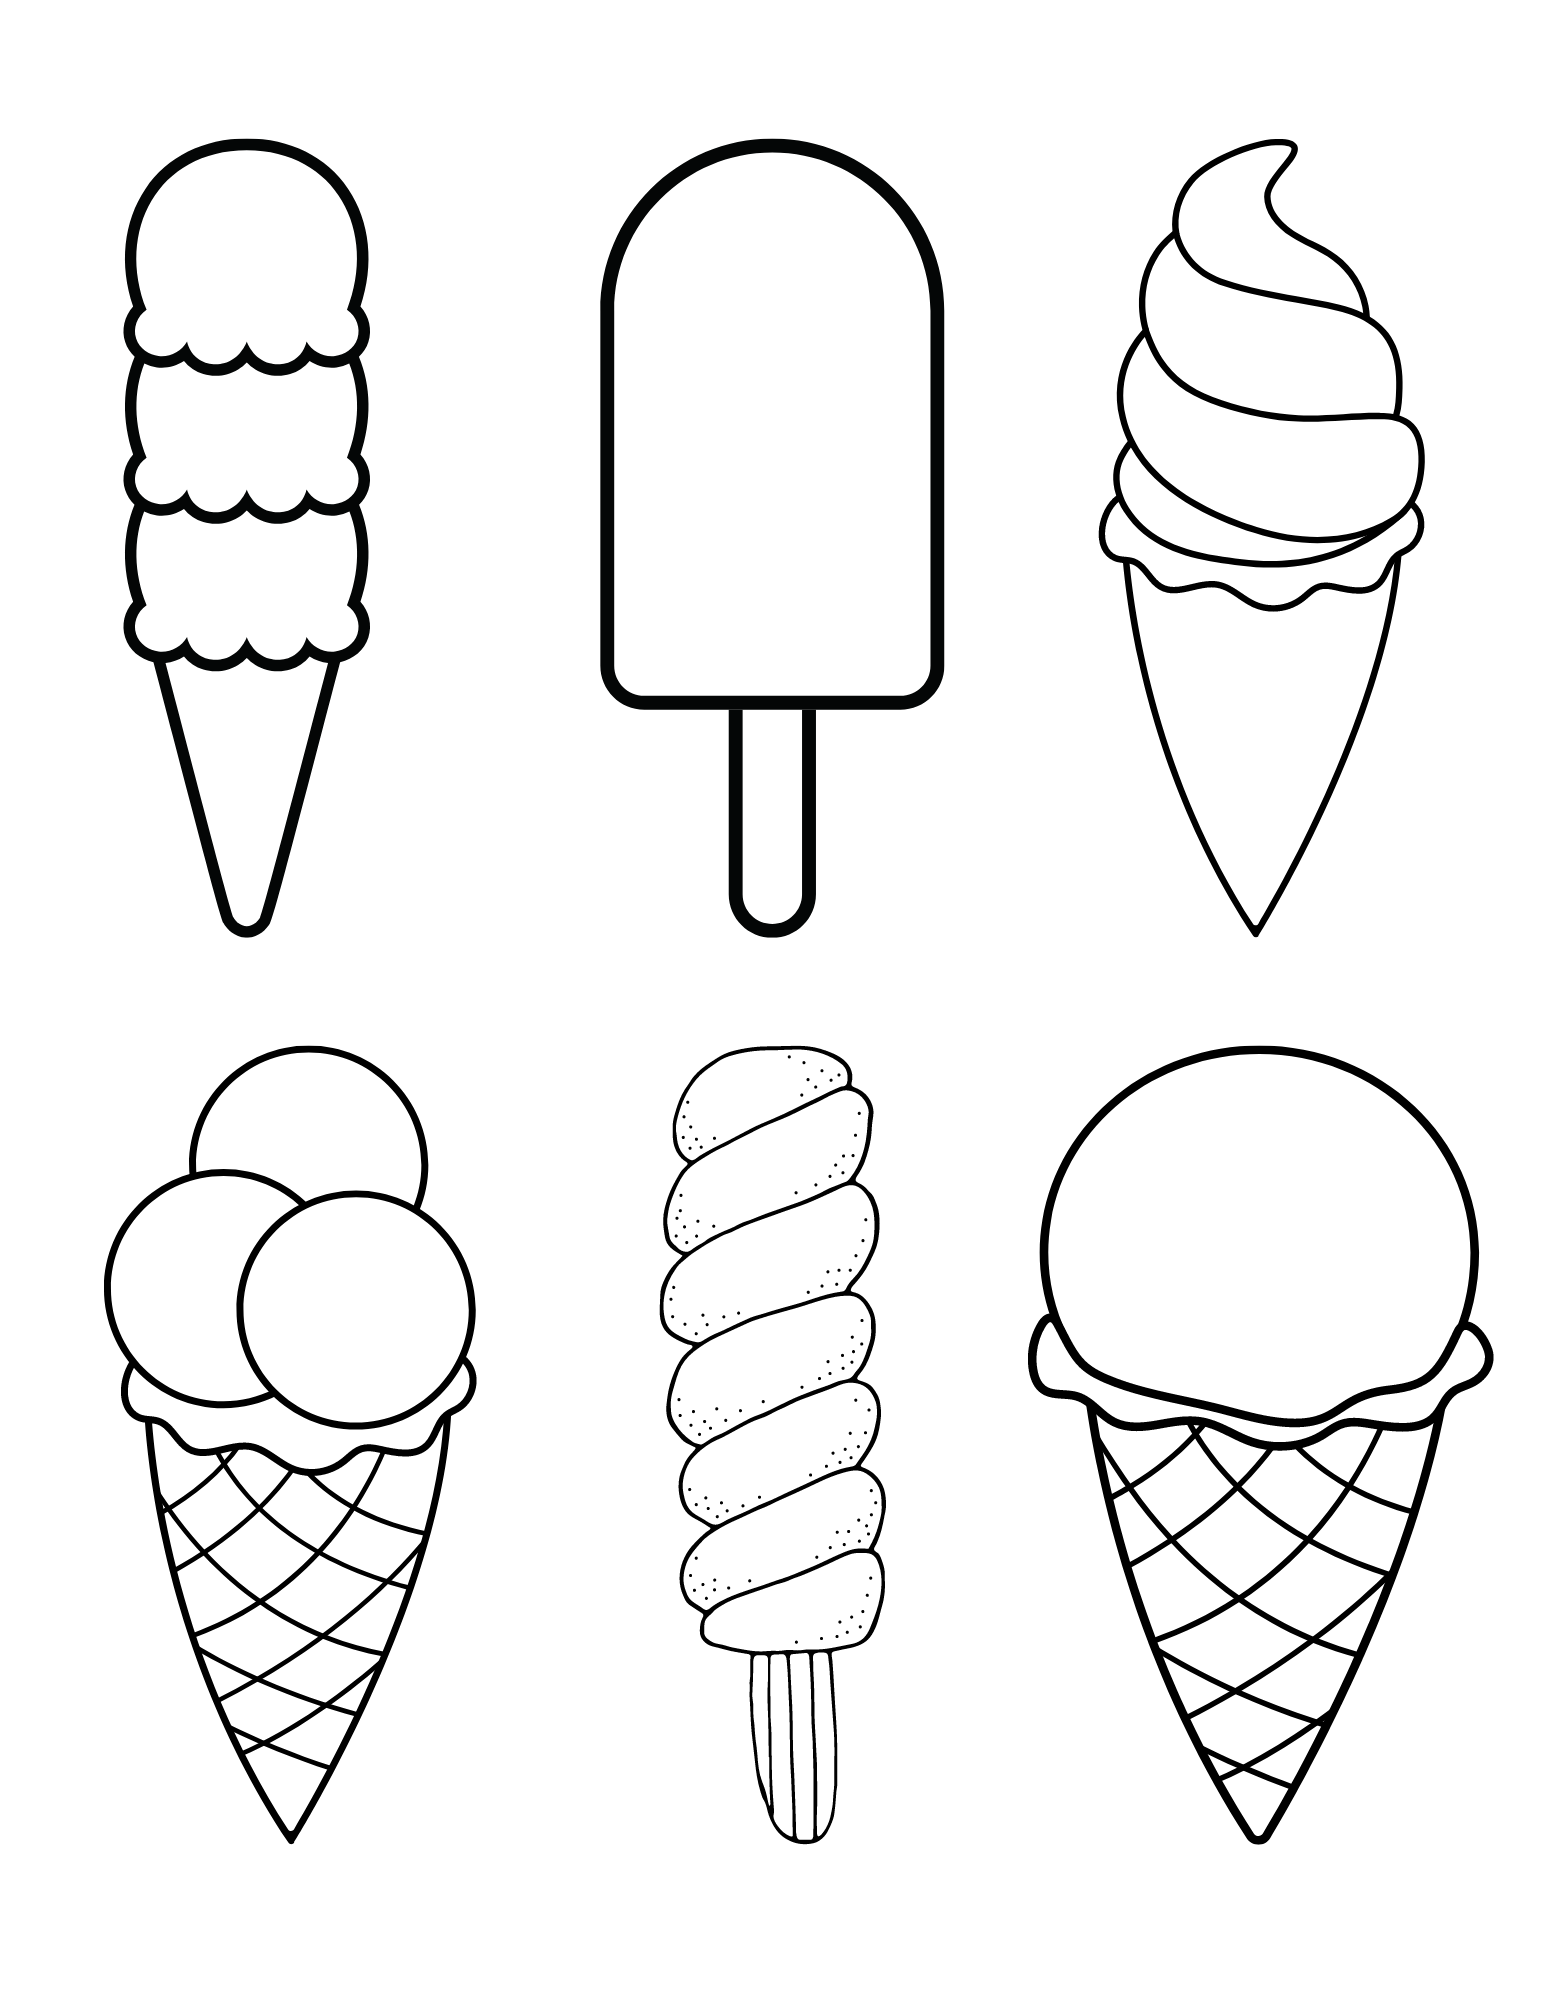 Free ice cream coloring pages for kids and adults